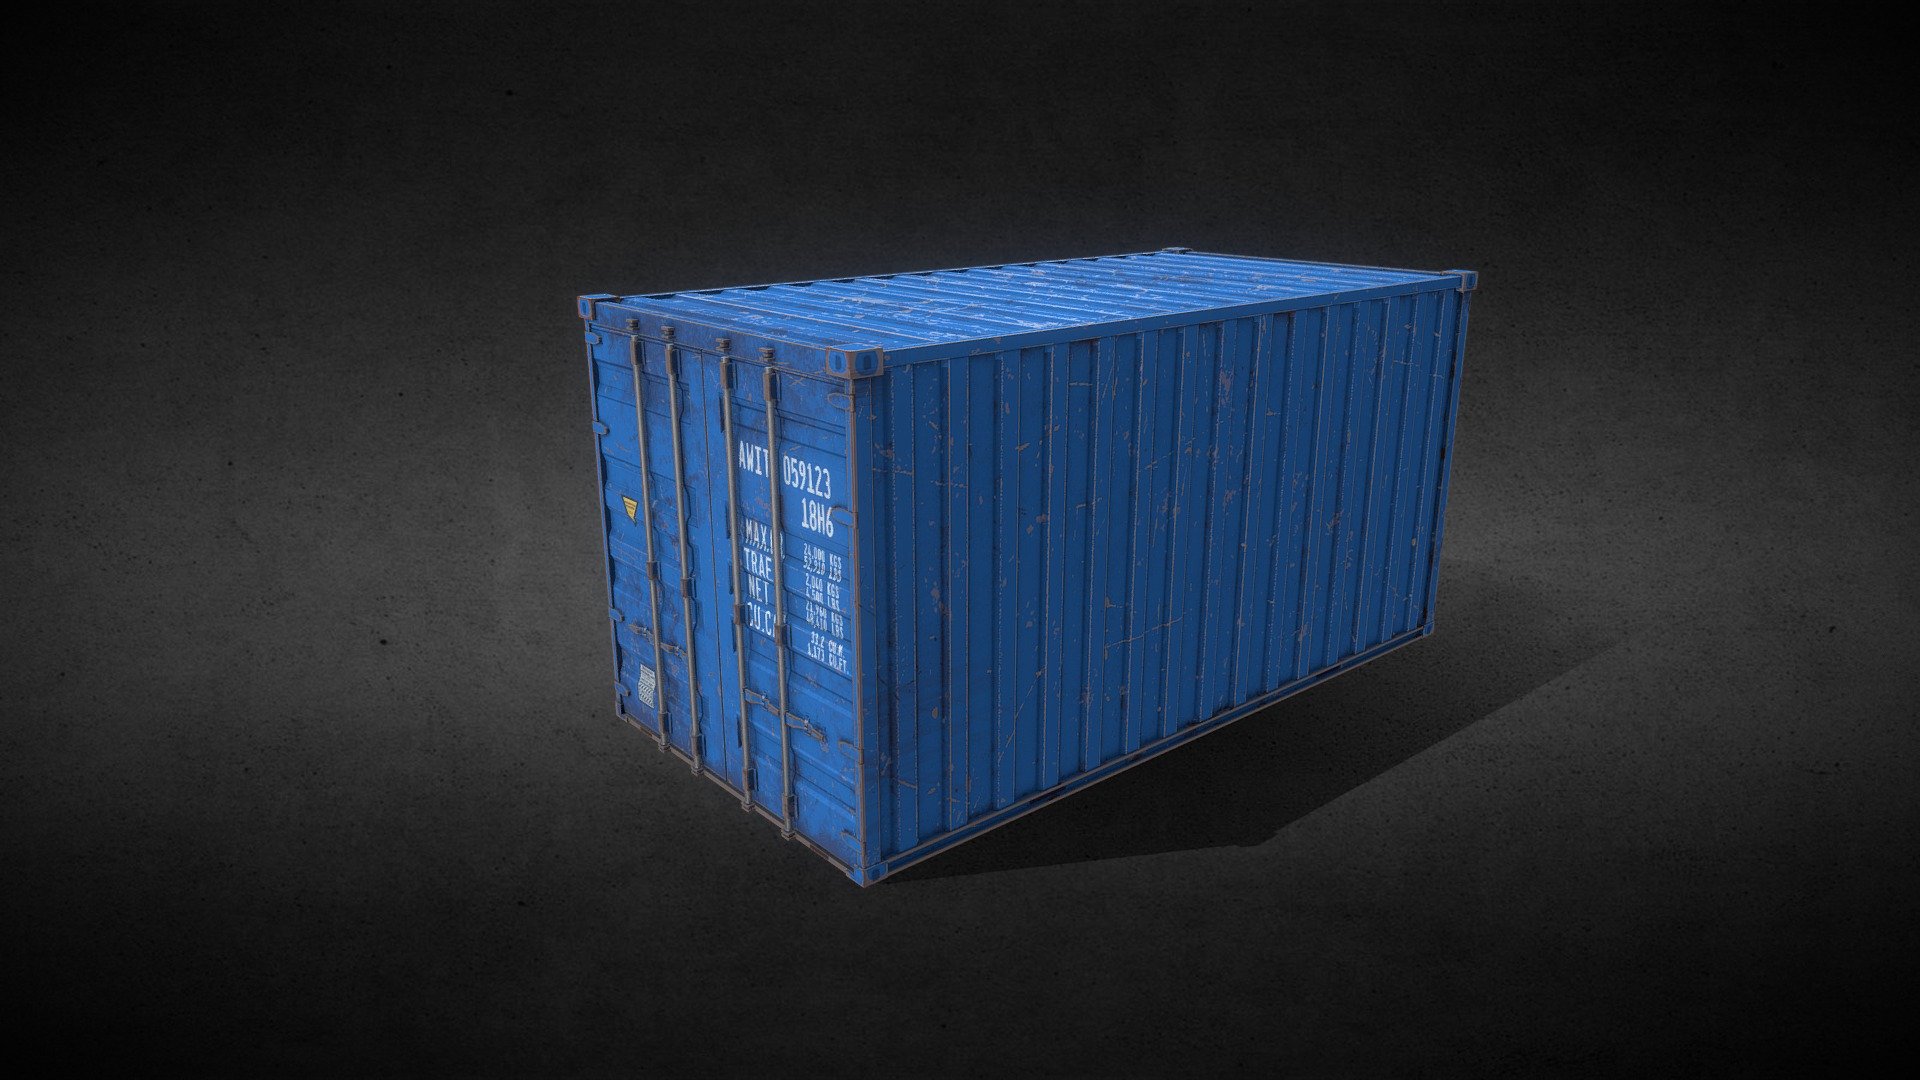 Shipping Container - low poly model - Shipping Container LowPoly - 3D model by JCVallejos 3d model